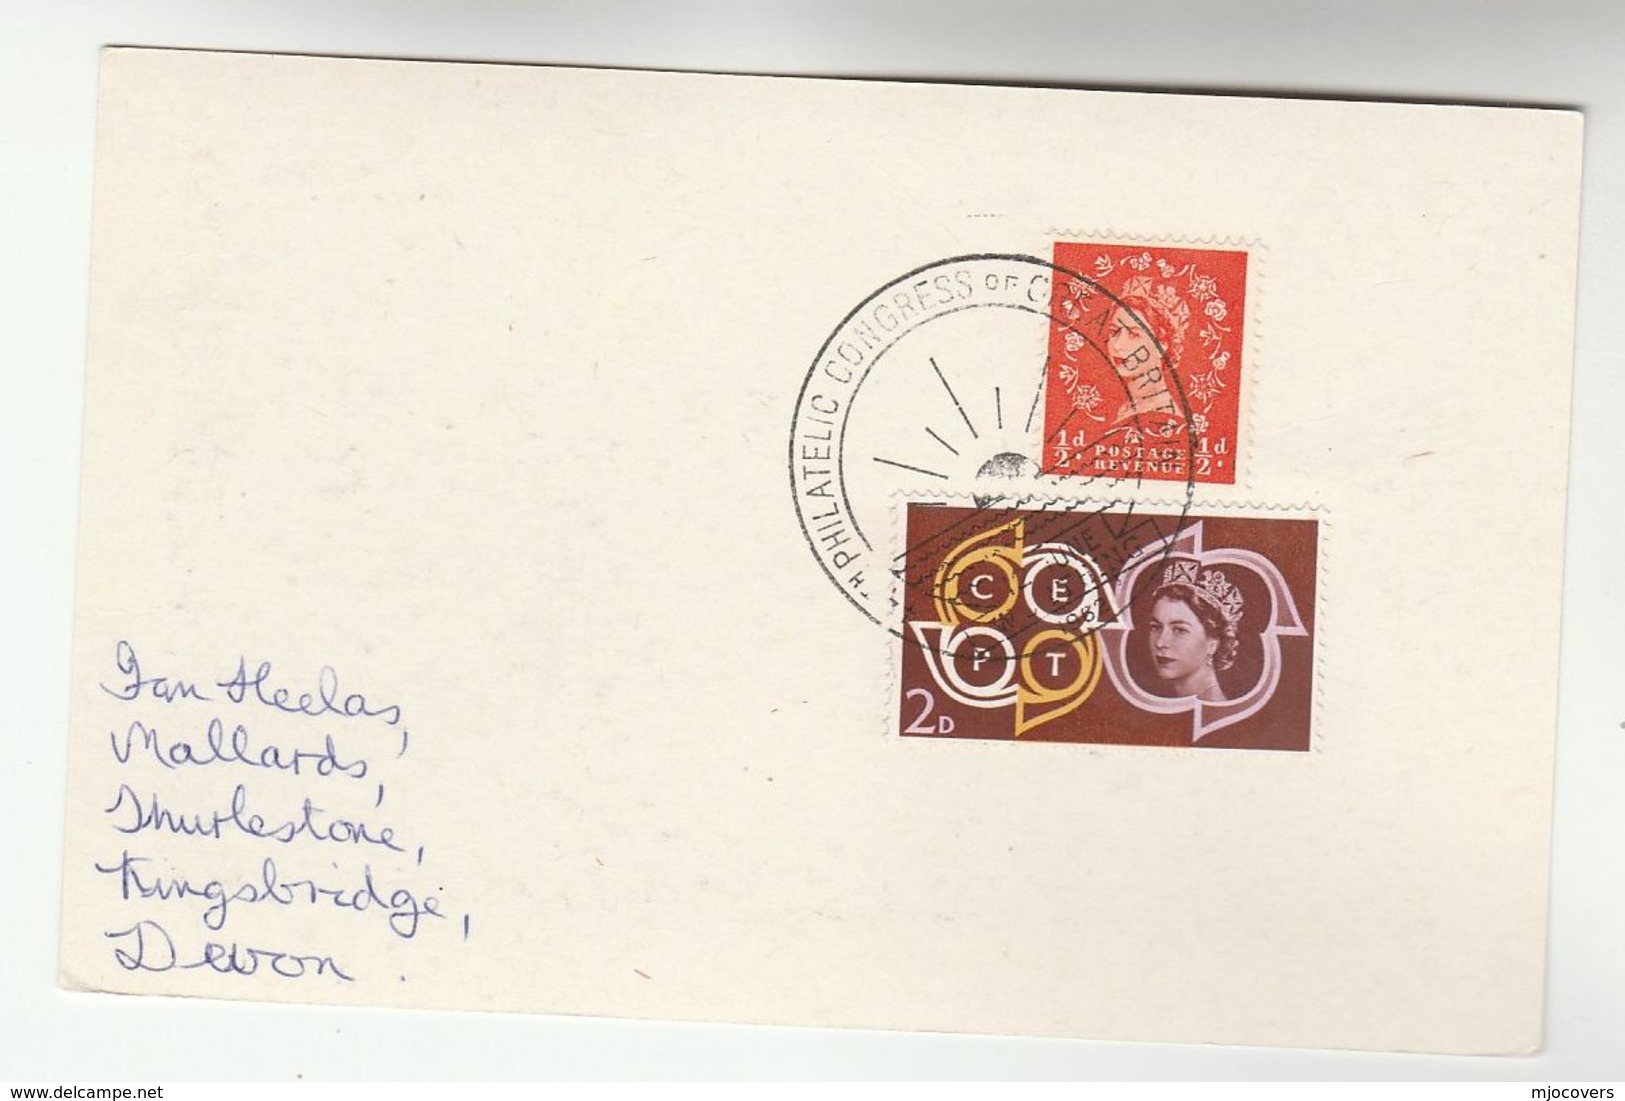 1962 WORTHING GB PHILATELIC CONGRESS EVENT Postcard Illus 1806 POST OFFICE & LIBRARY Stamps Philatelic Exhibition Cover - Worthing